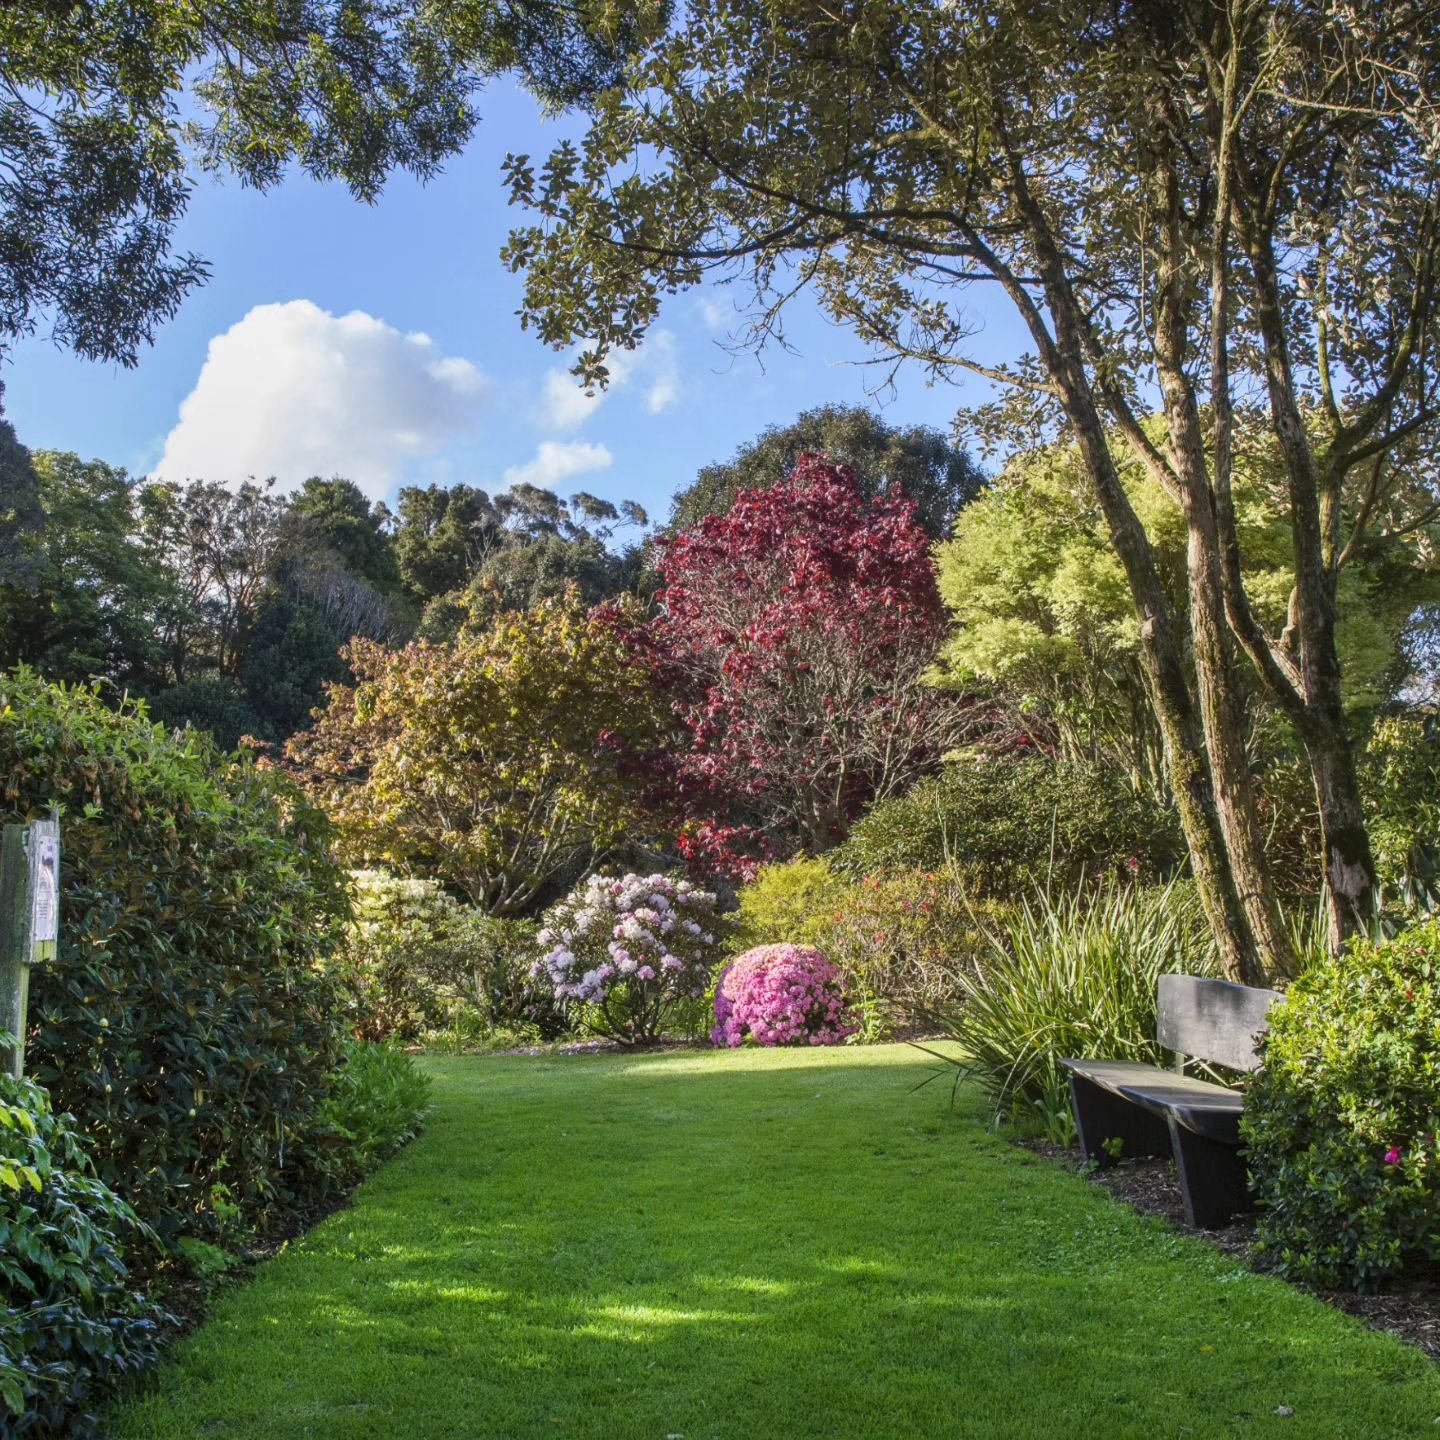 Hollard Gardens 🌺

@hollardgardens is a plant collectors dream, displaying huge varieties of both native and exotic plants. The garden continues Bernie Hollard's legacy of collection, plant innovation, and sustainability. The garden is comprised of 